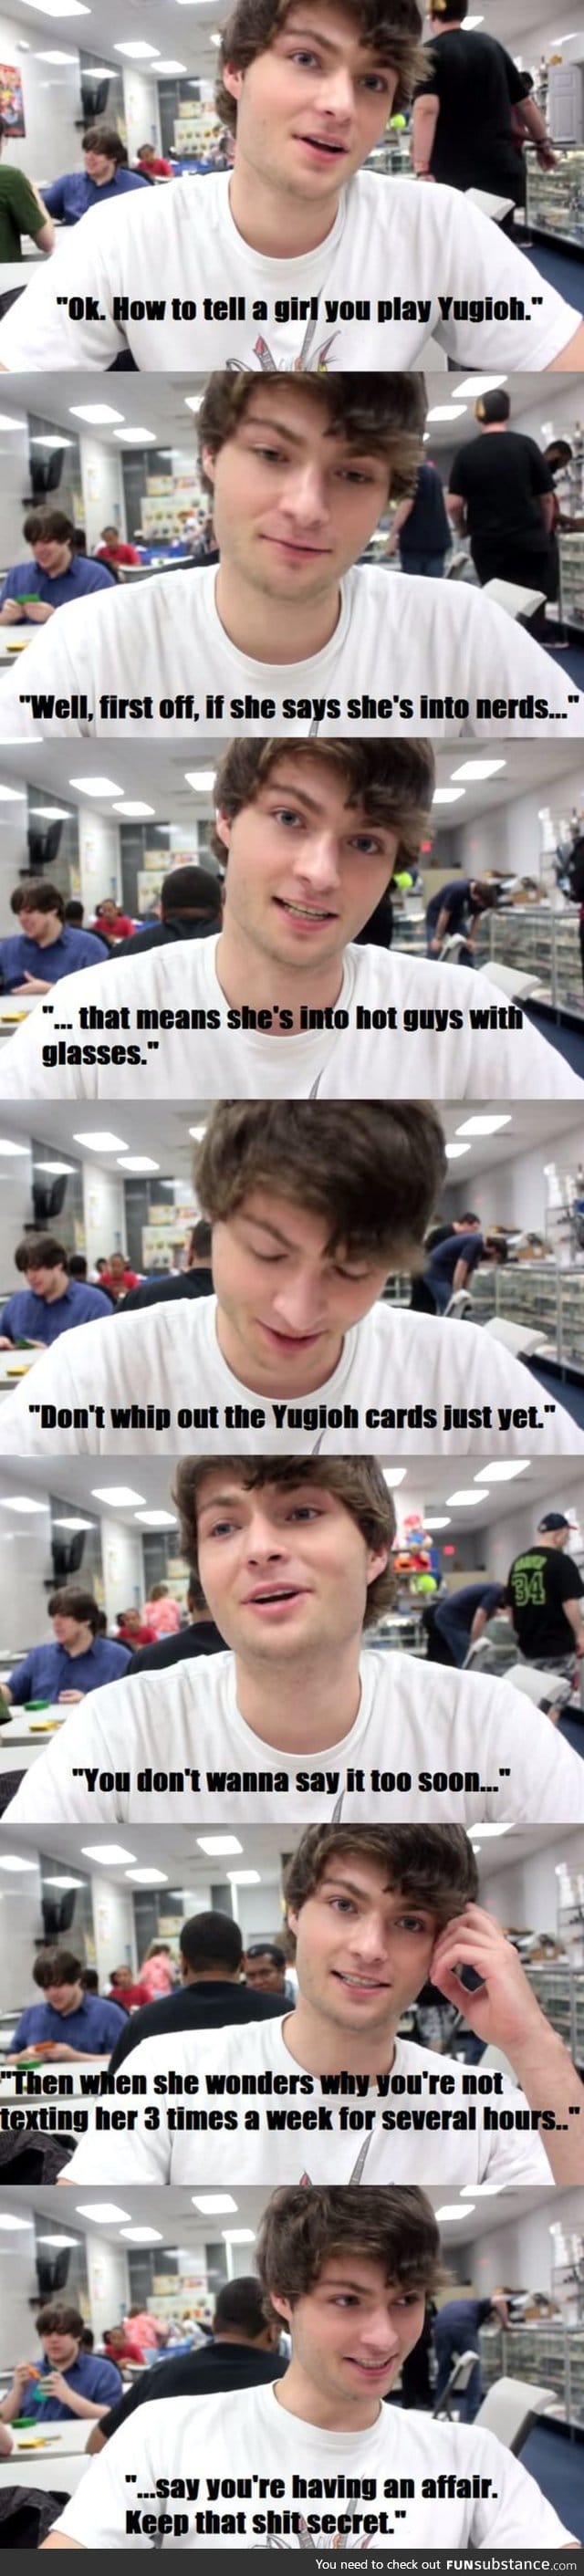 How to tell a girl you play Yugioh